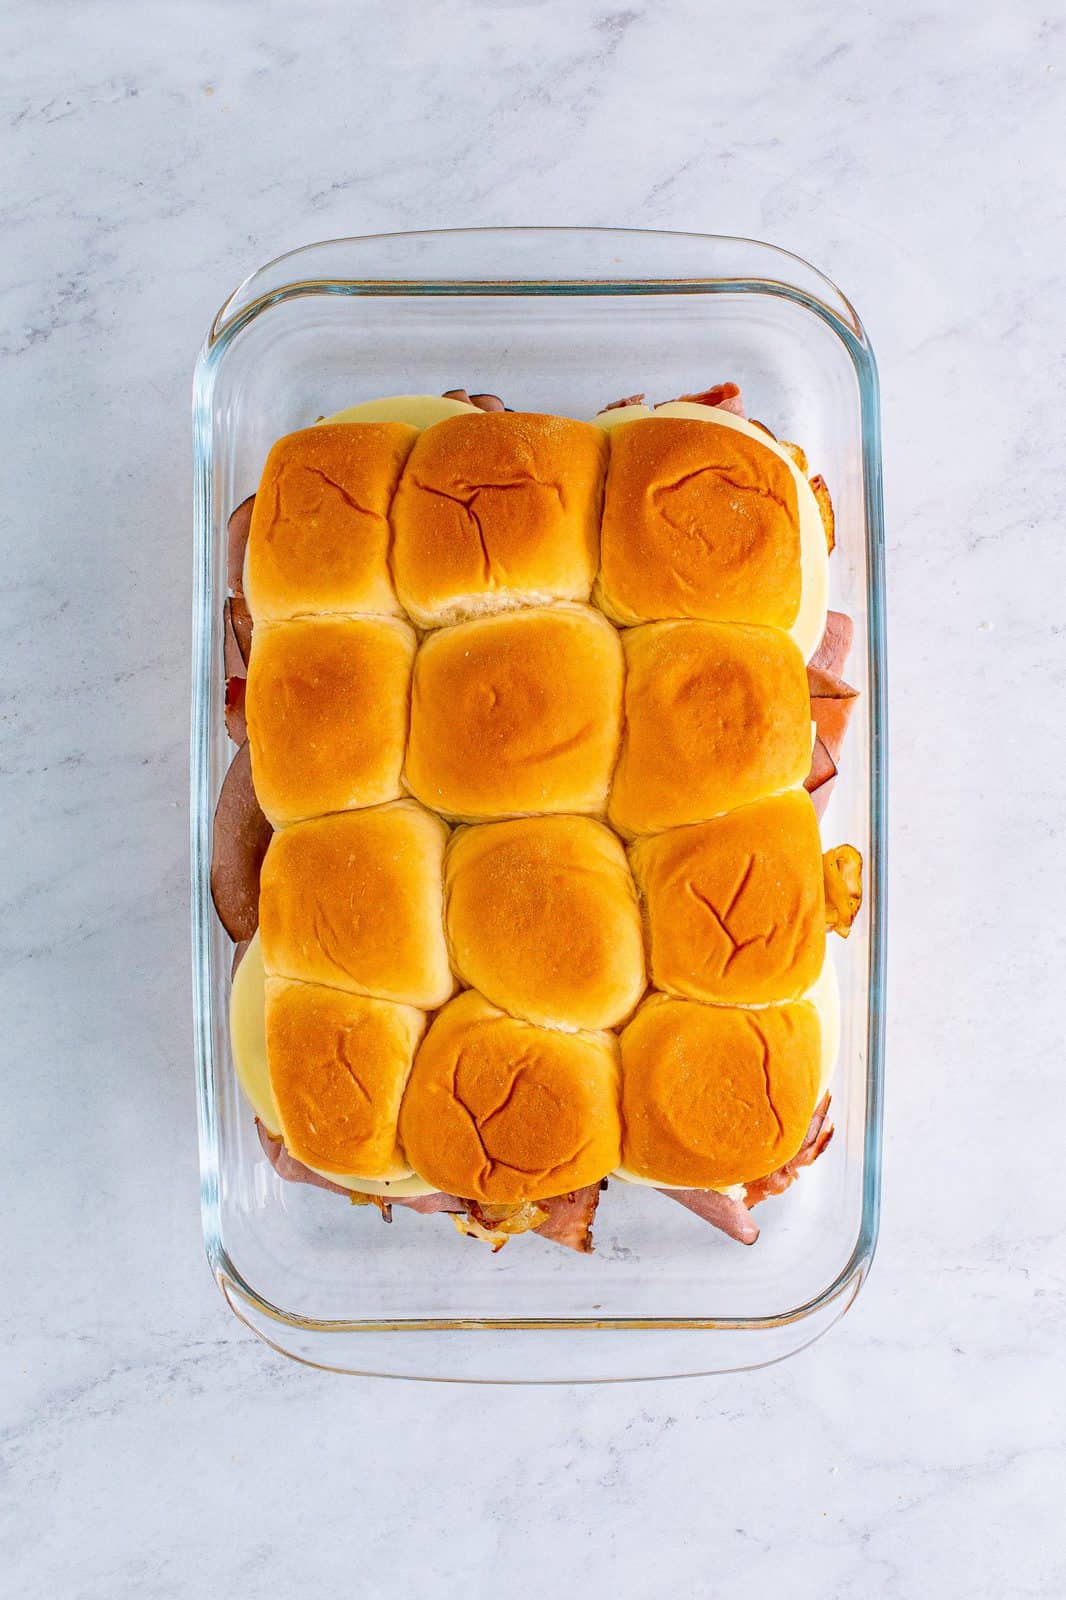 Slider bun tops added to top of sandwiches.